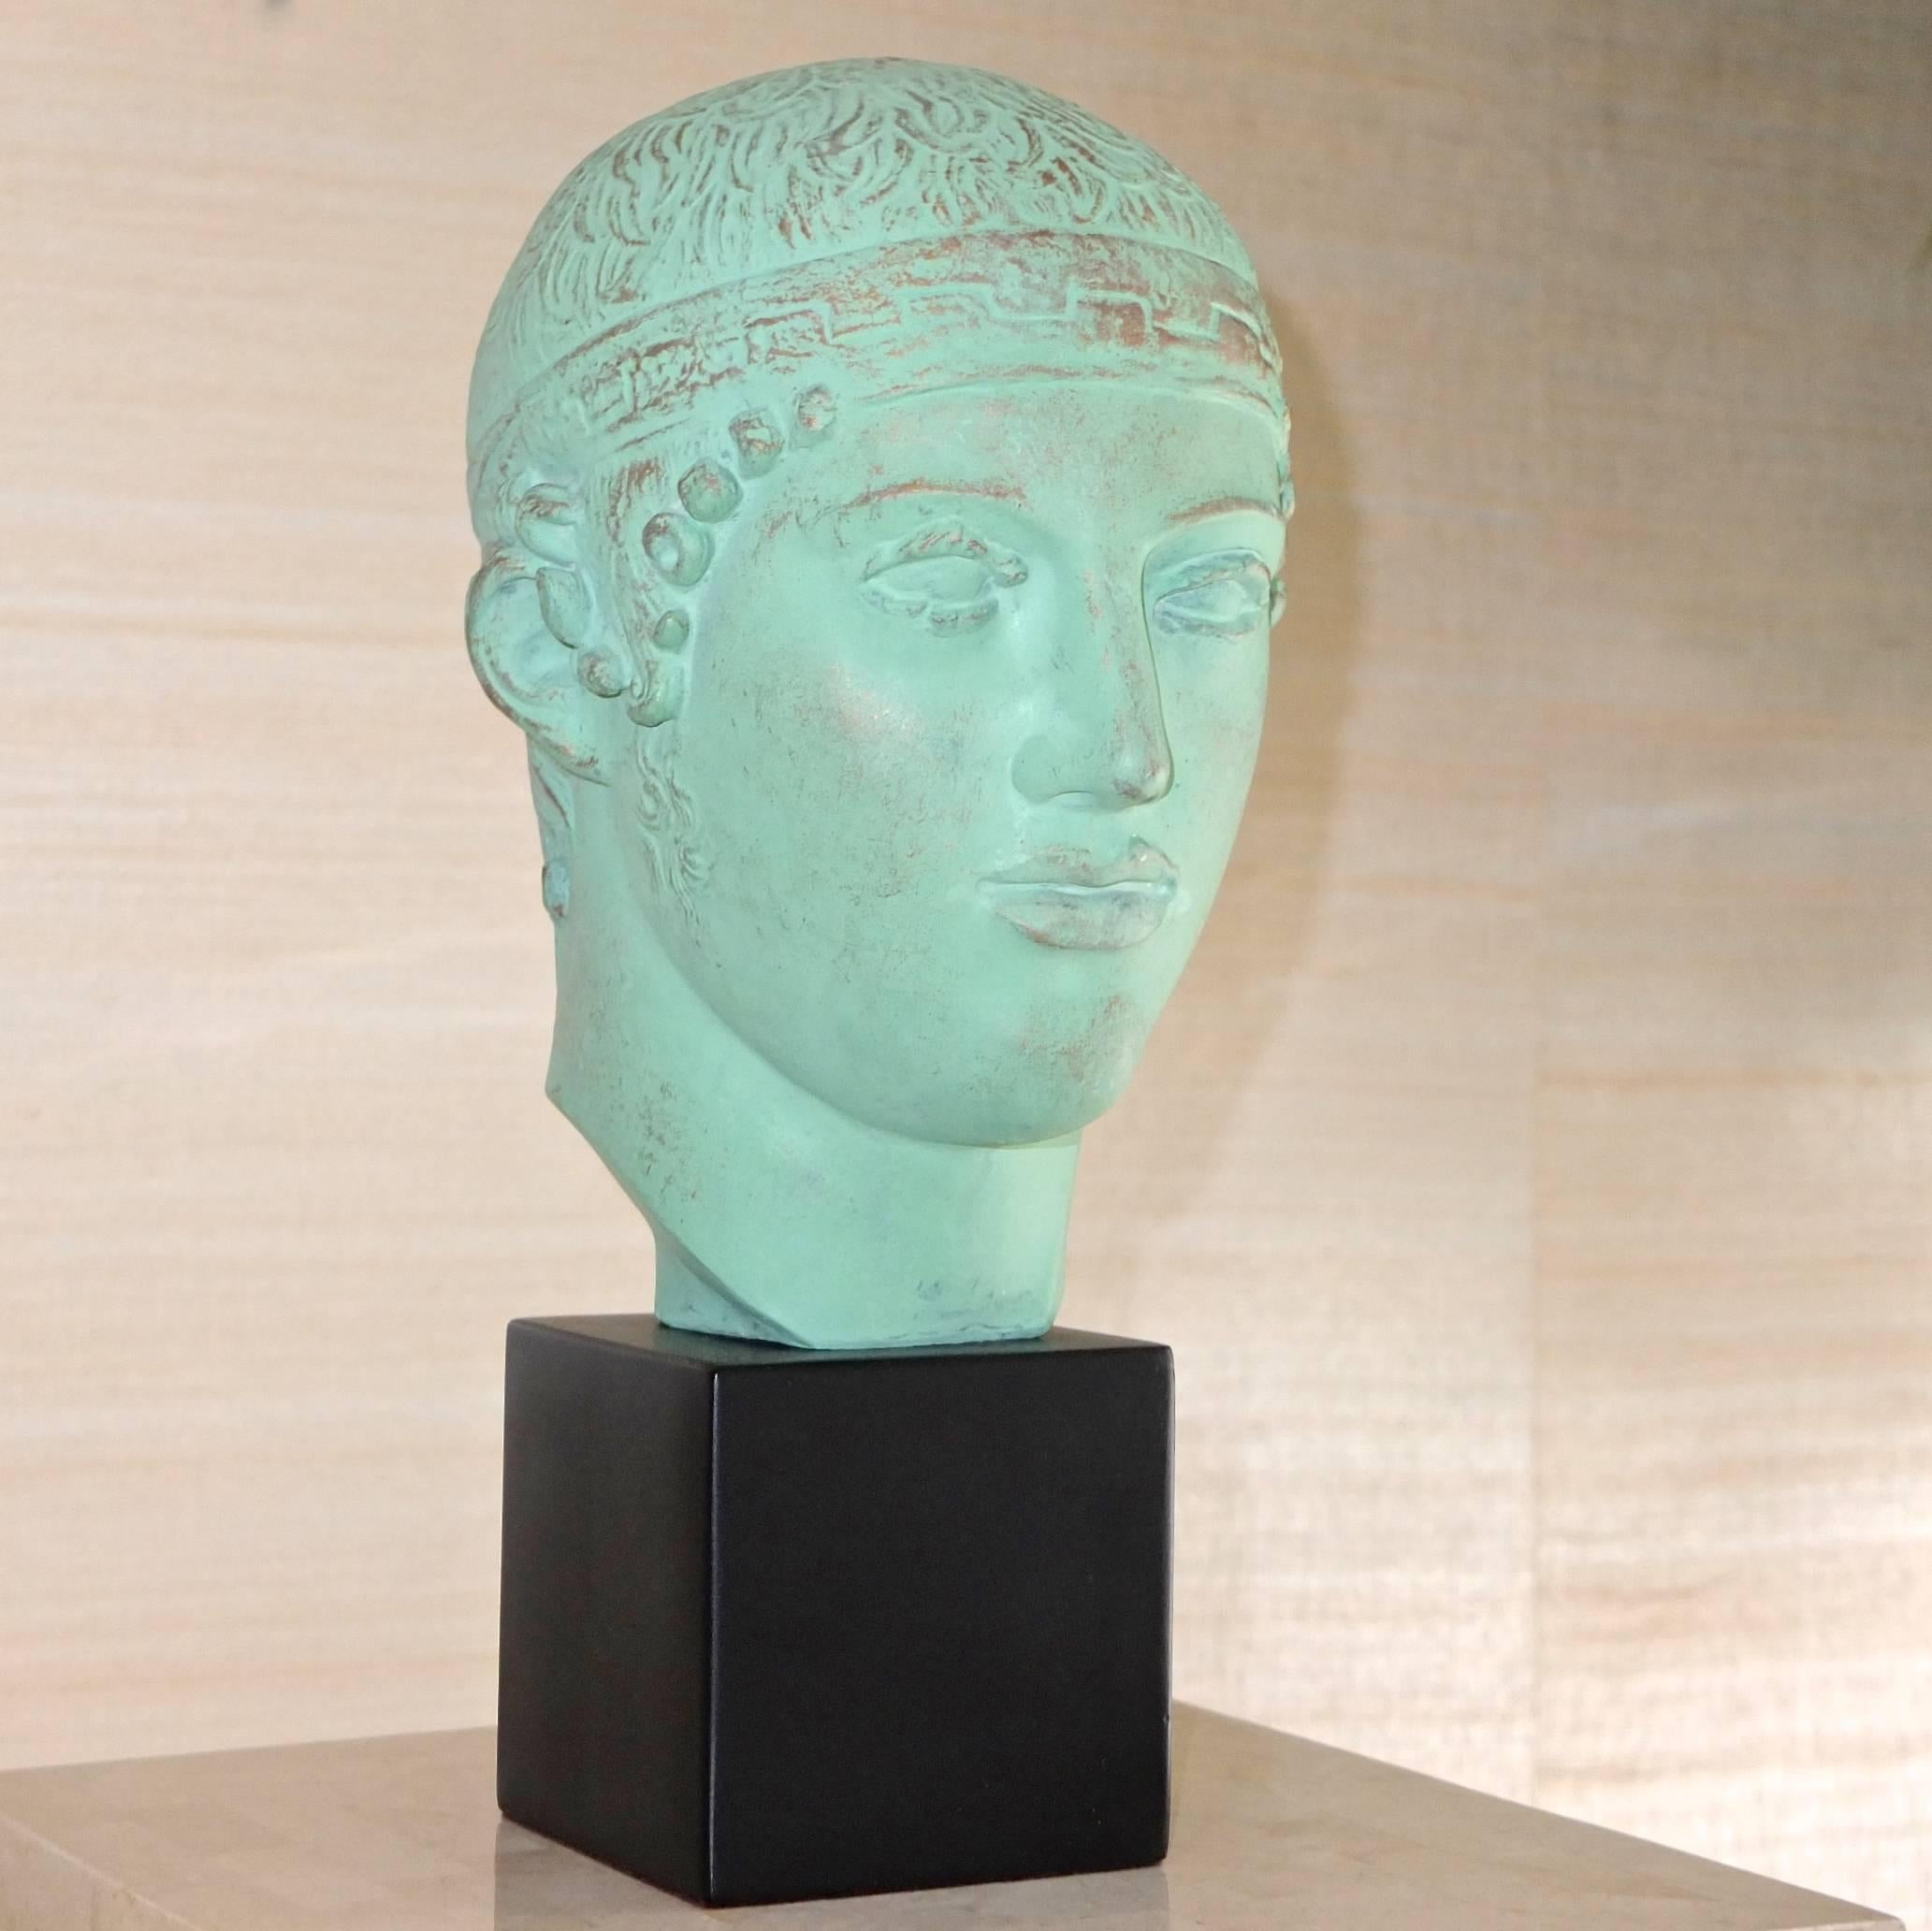 Alva studios replica Roman verdigris bust on solid block stand of young Roman man, circa 1980. Titled Head of a Charioteer.

Alva studios, formed by Virginia Morris Pollak and Alfred Wokenberg after WWII, created high-quality sculptural replicas